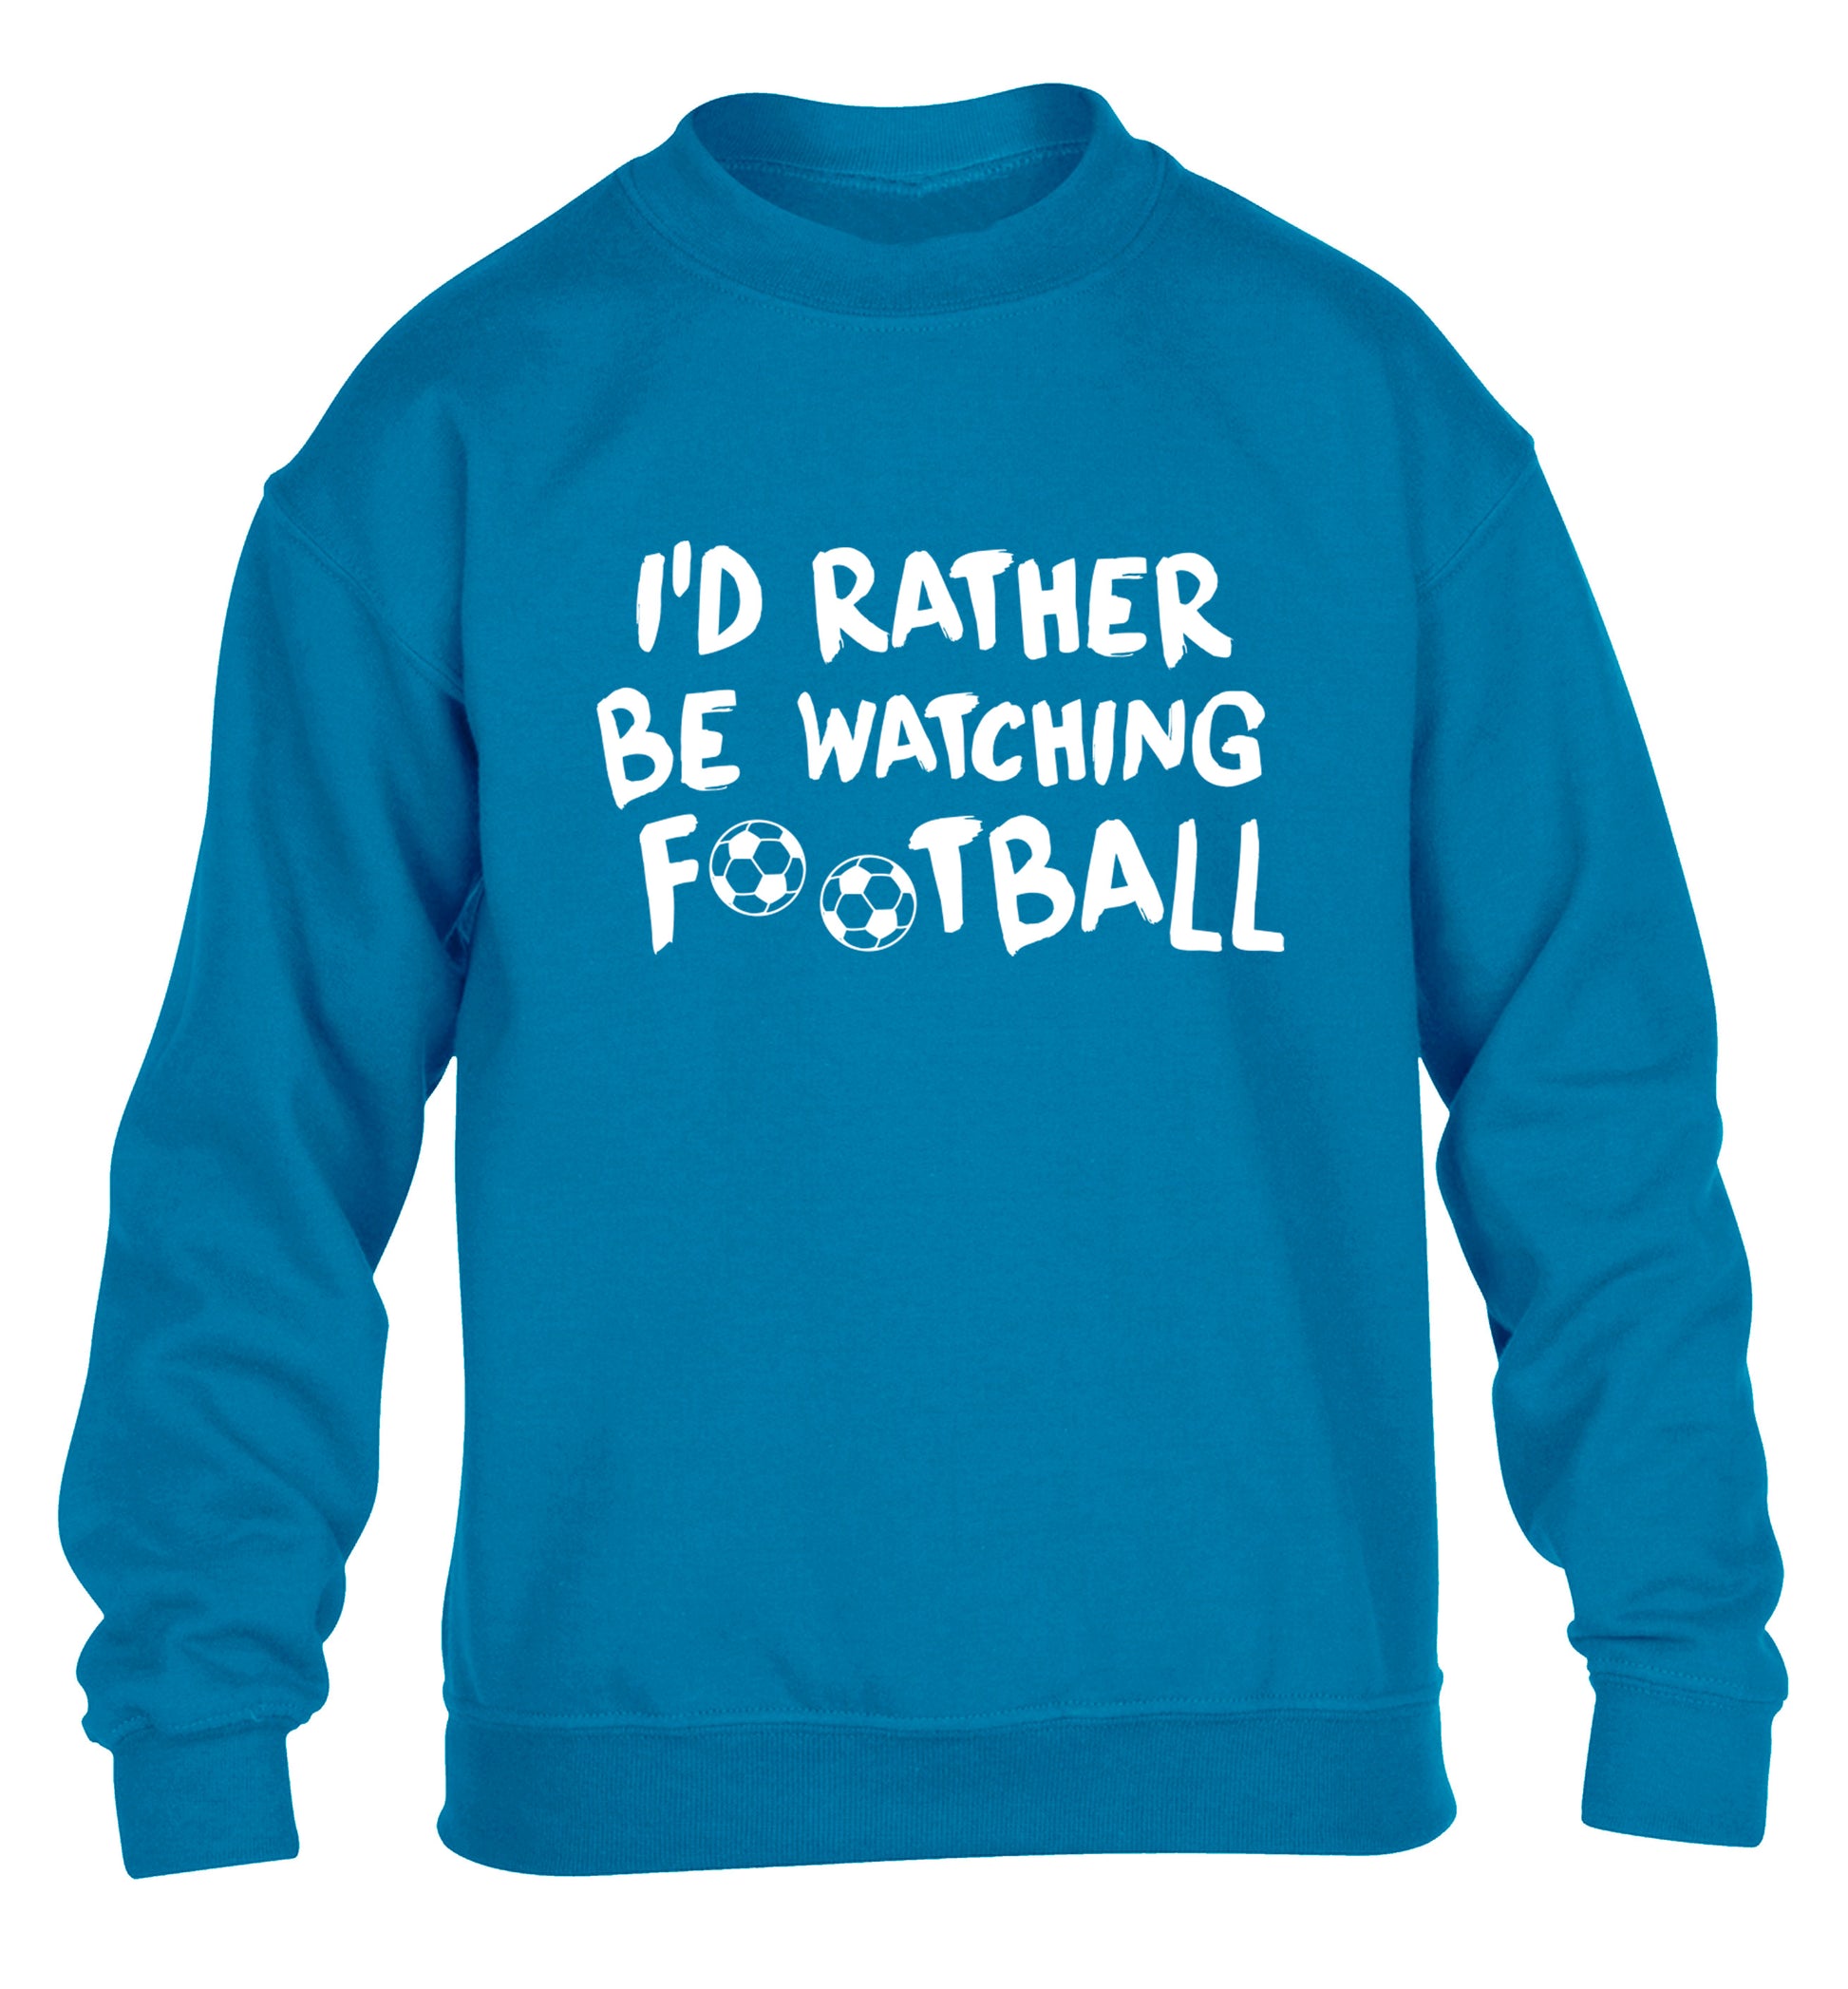 I'd rather be watching football children's blue sweater 12-14 Years